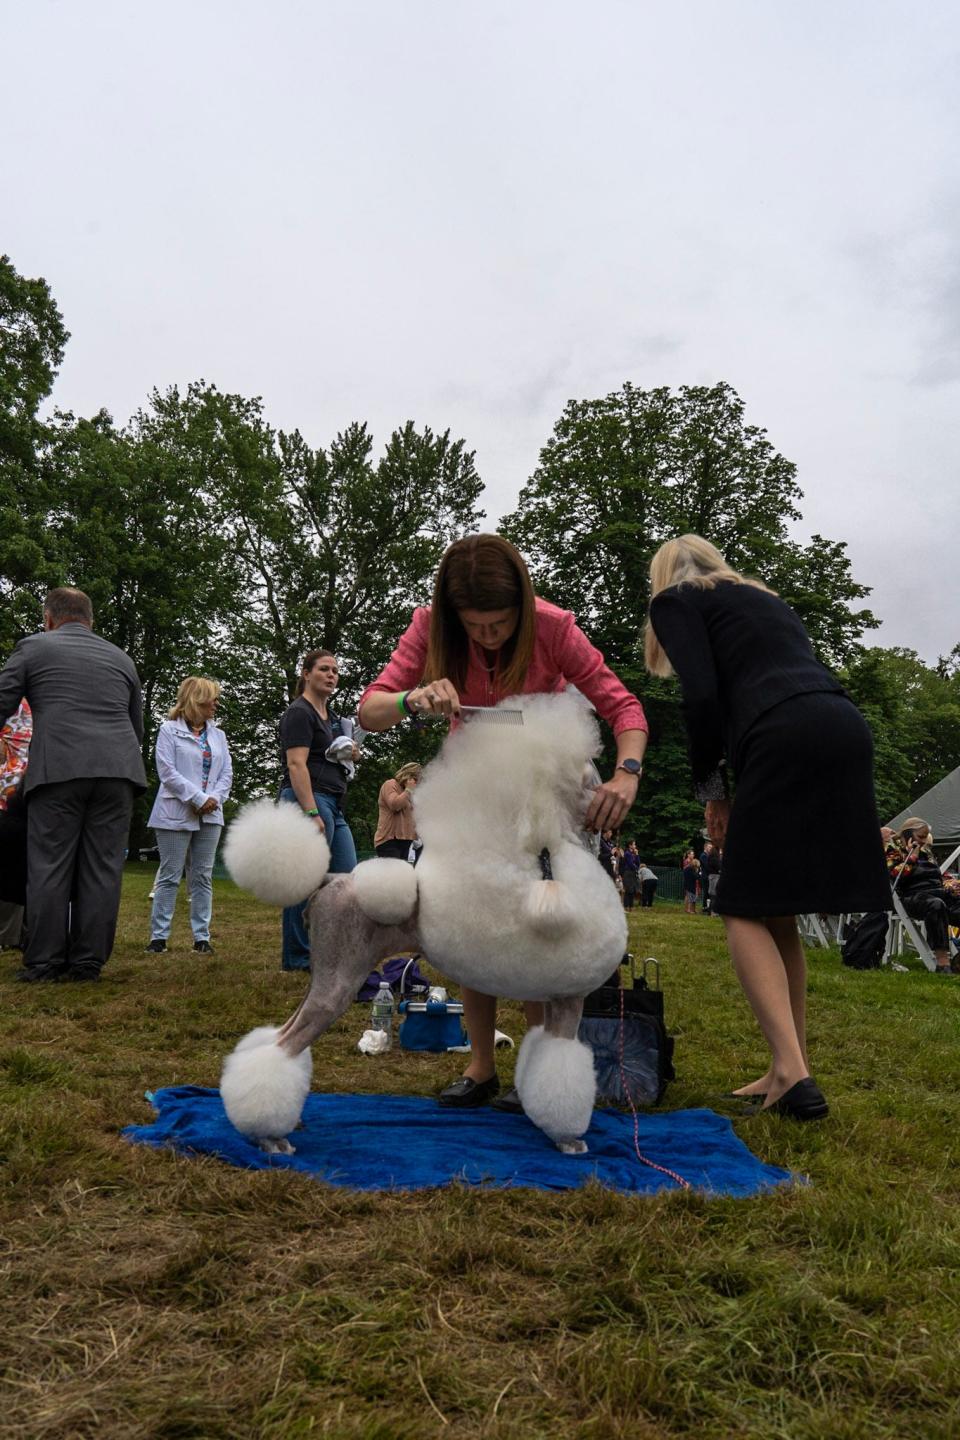 A poodle stands as someone grooms